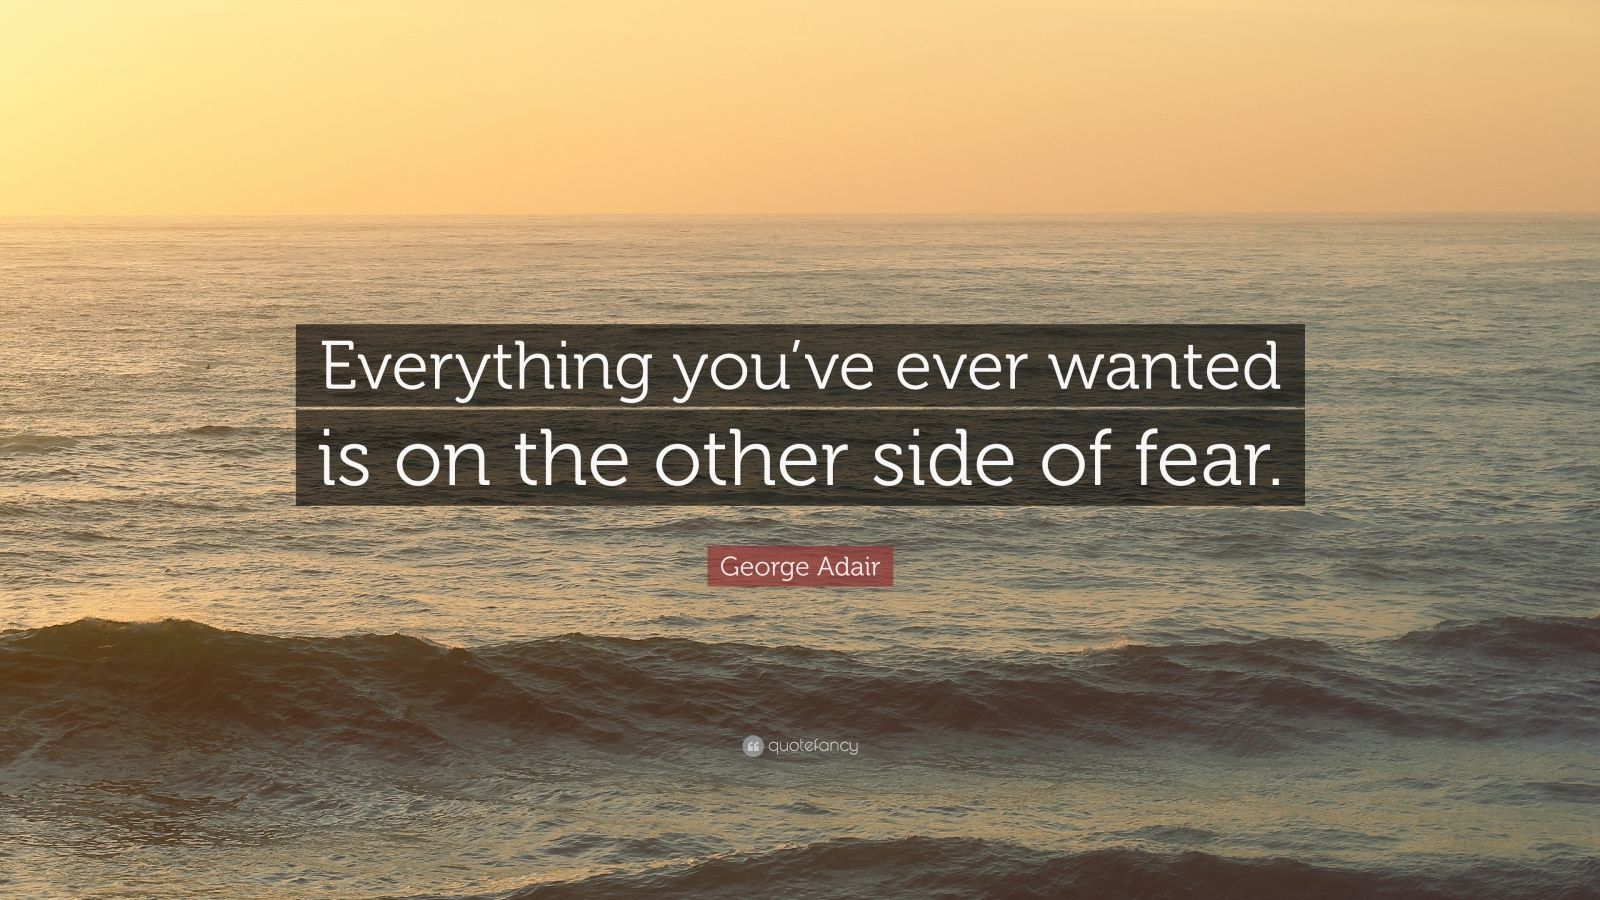 George Adair Quote “everything Youve Ever Wanted Is On The Other Side Of Fear” 9 Wallpapers 